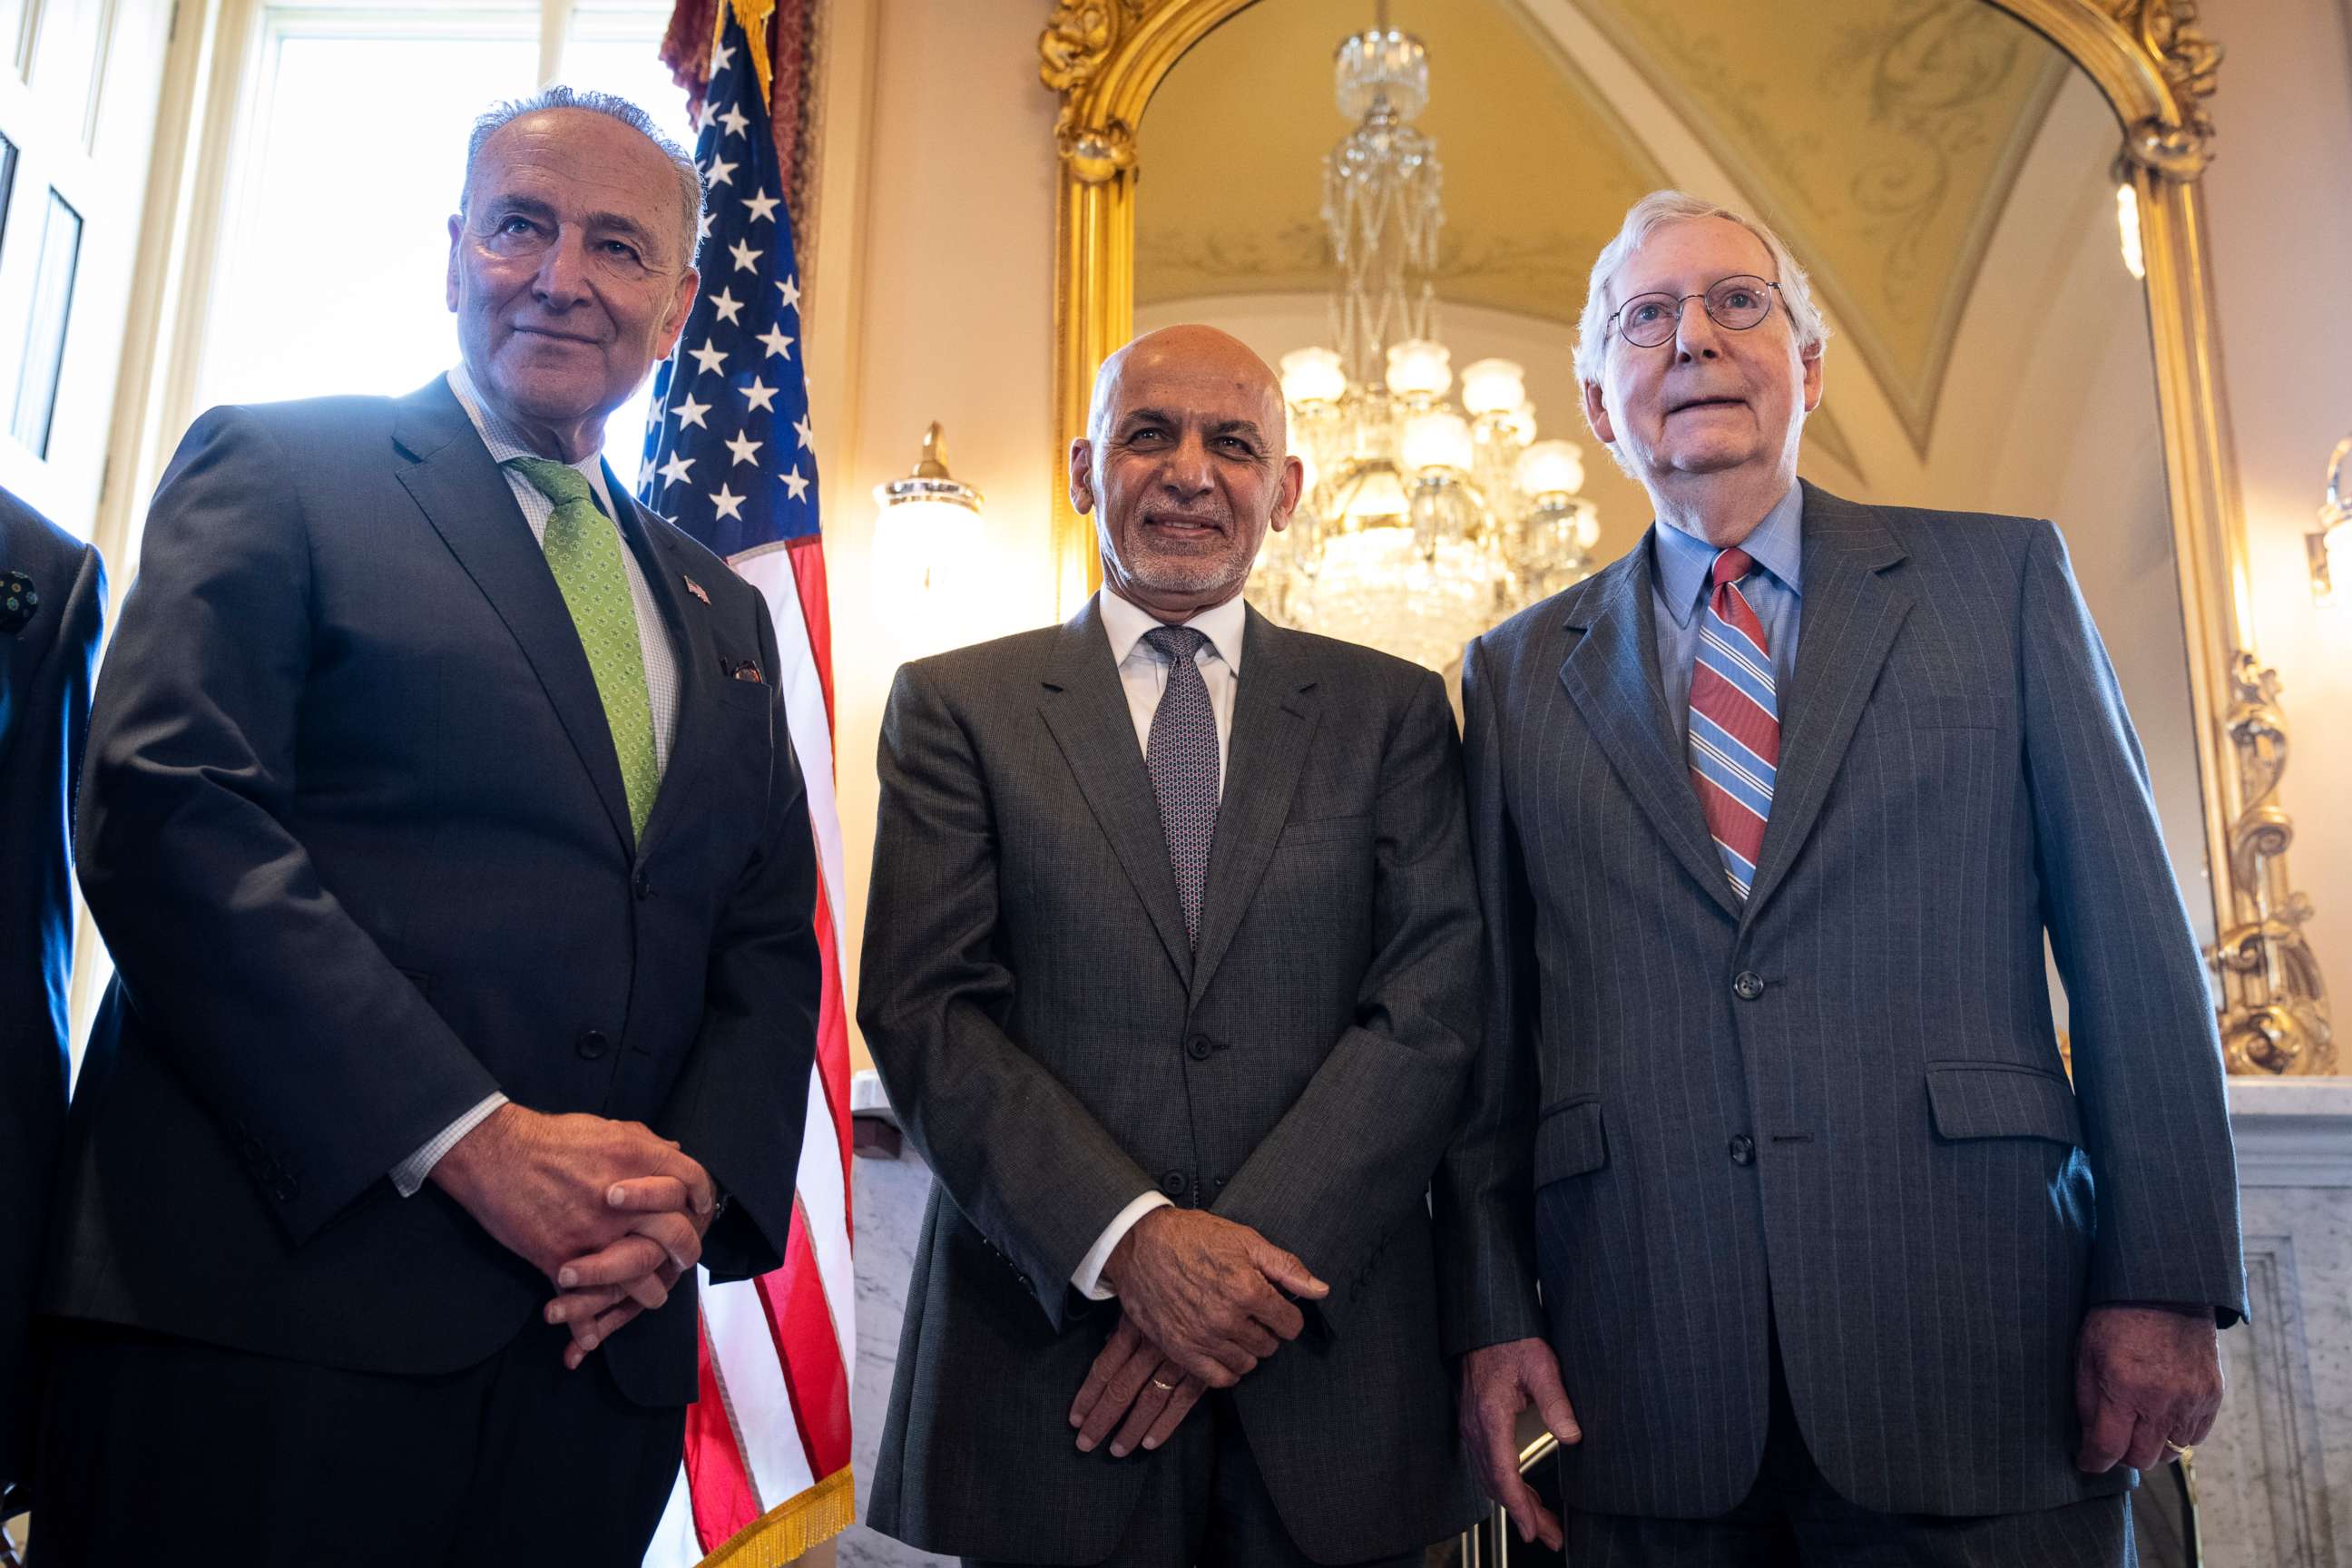 PHOTO: Senate Majority Leader Chuck Schumer, President of Afghanistan Ashraf Ghani and Senate Minority Leader Mitch McConnell pose for pictures before a meeting at the U.S. Capitol on June 24, 2021, in Washington.